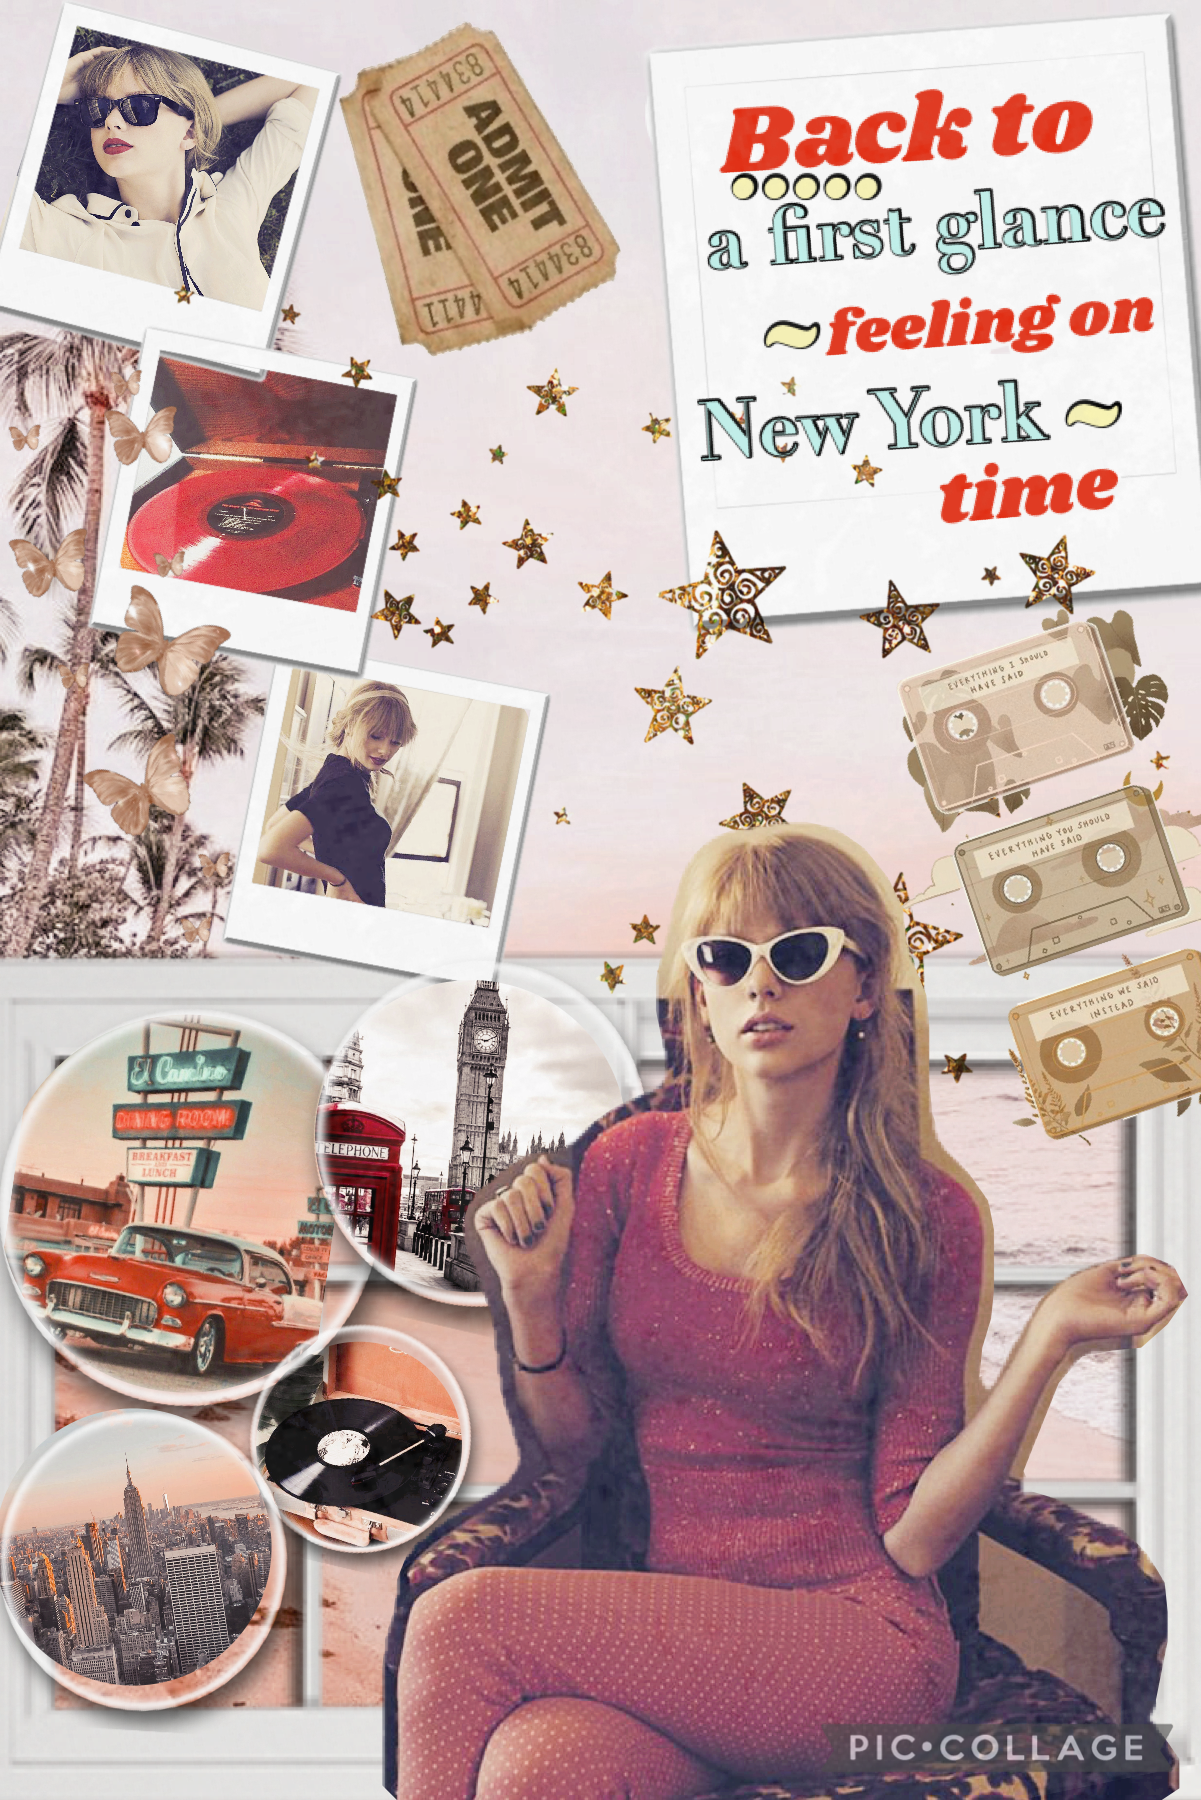 20.12.23 Red Taylor Swift retro style aesthetic collage 